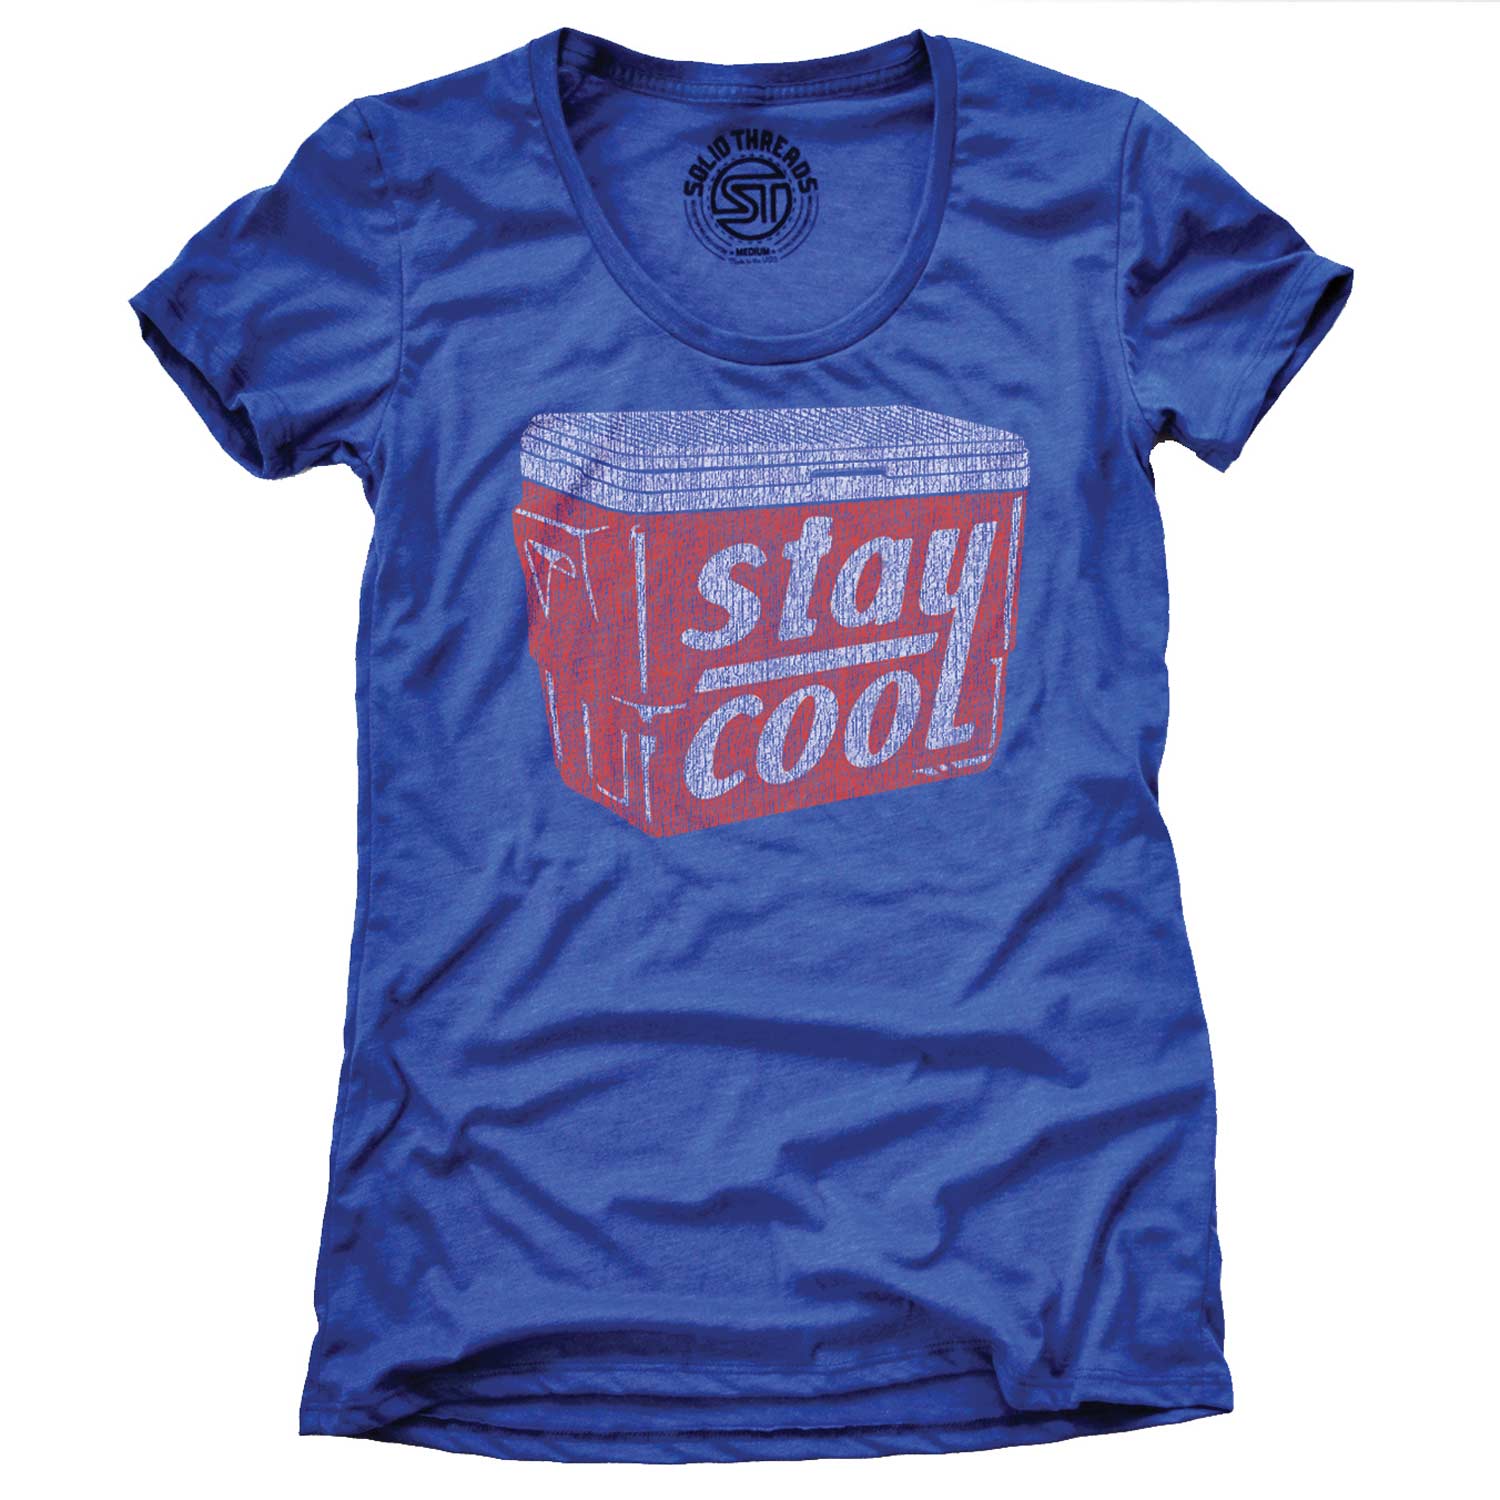 Solid Threads Women's Vintage Stay Cool Graphic Tee | Funny Drinking T-Shirt Royal / Small